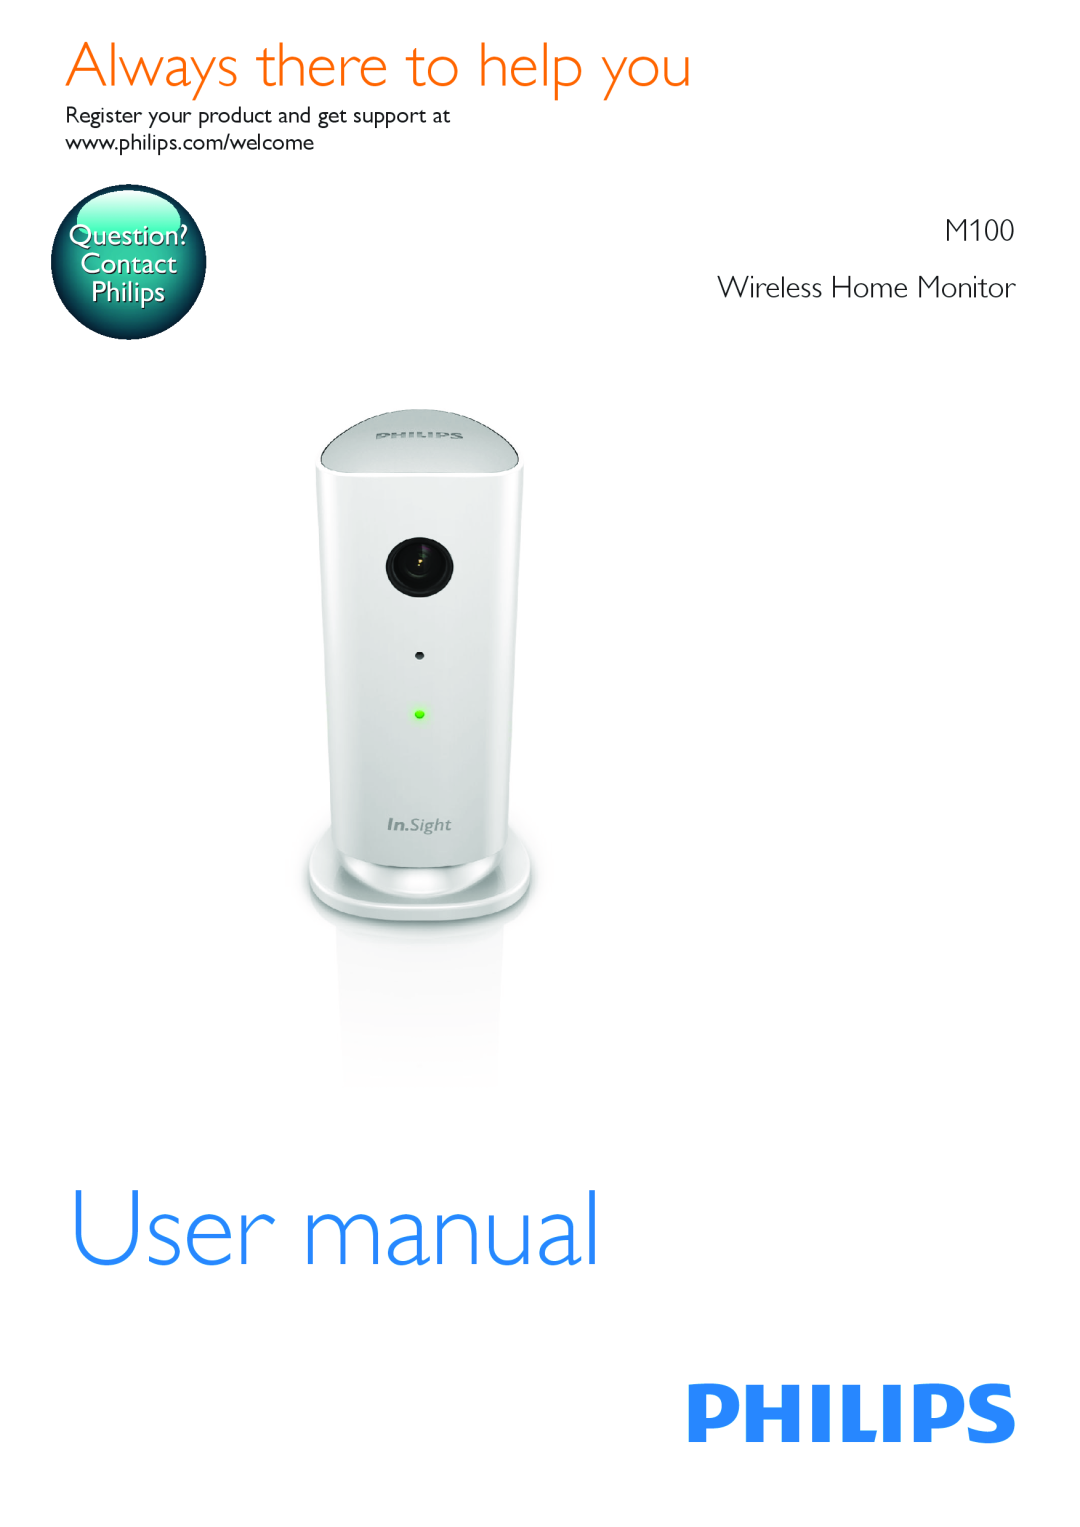 Philips user manual M100 Wireless Home Monitor, Always there to help you, Question? Contact Philips 